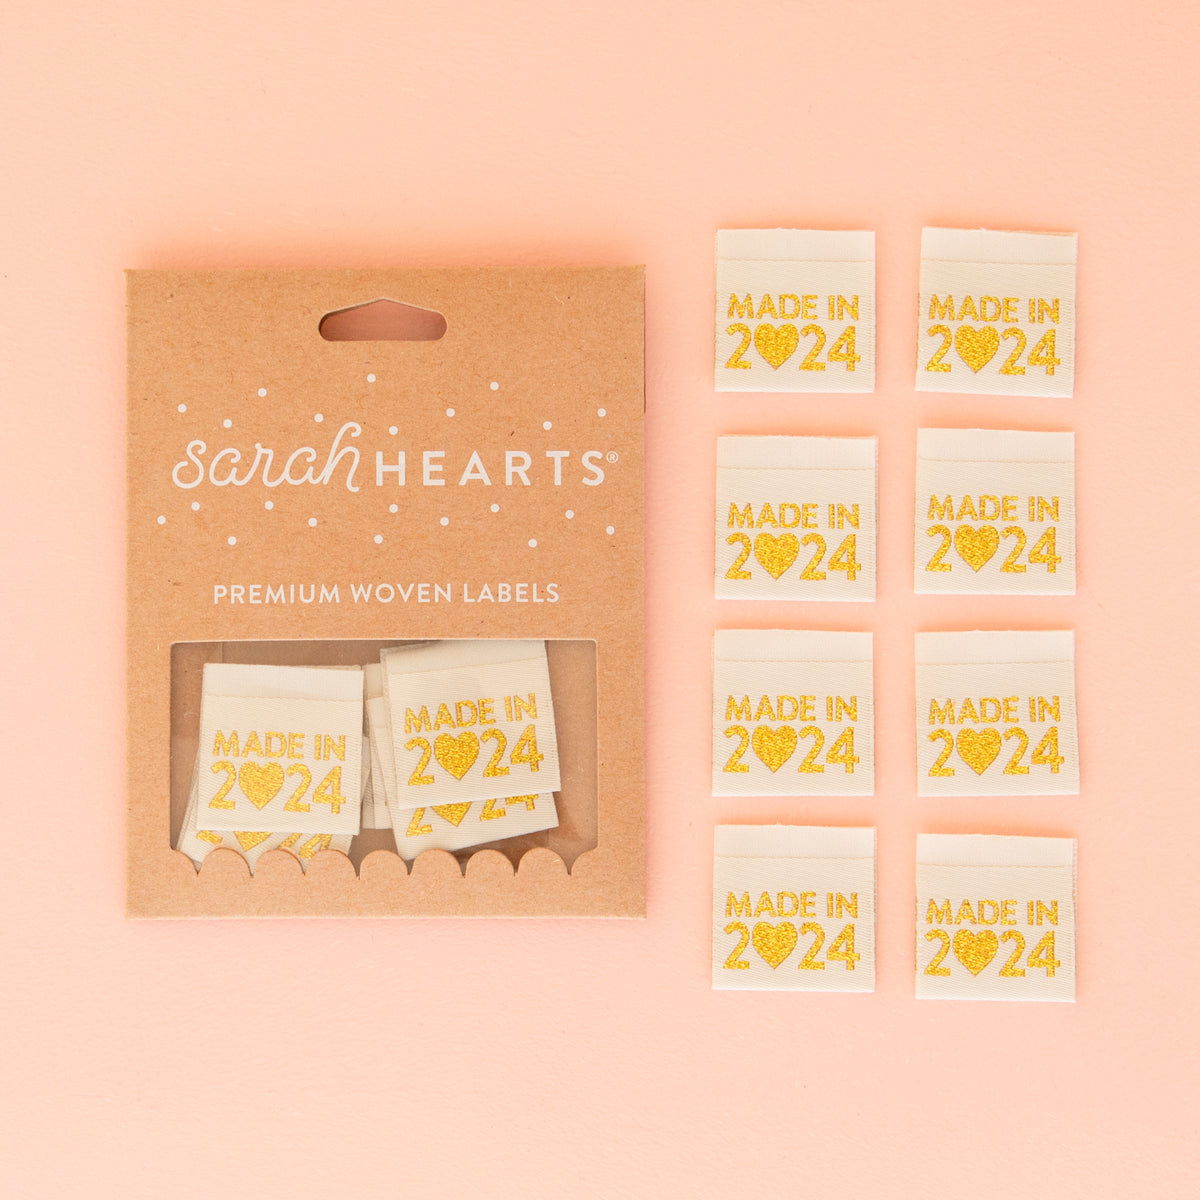 Sarah Hearts Quilt Label - Made in 2024 Metallic Gold